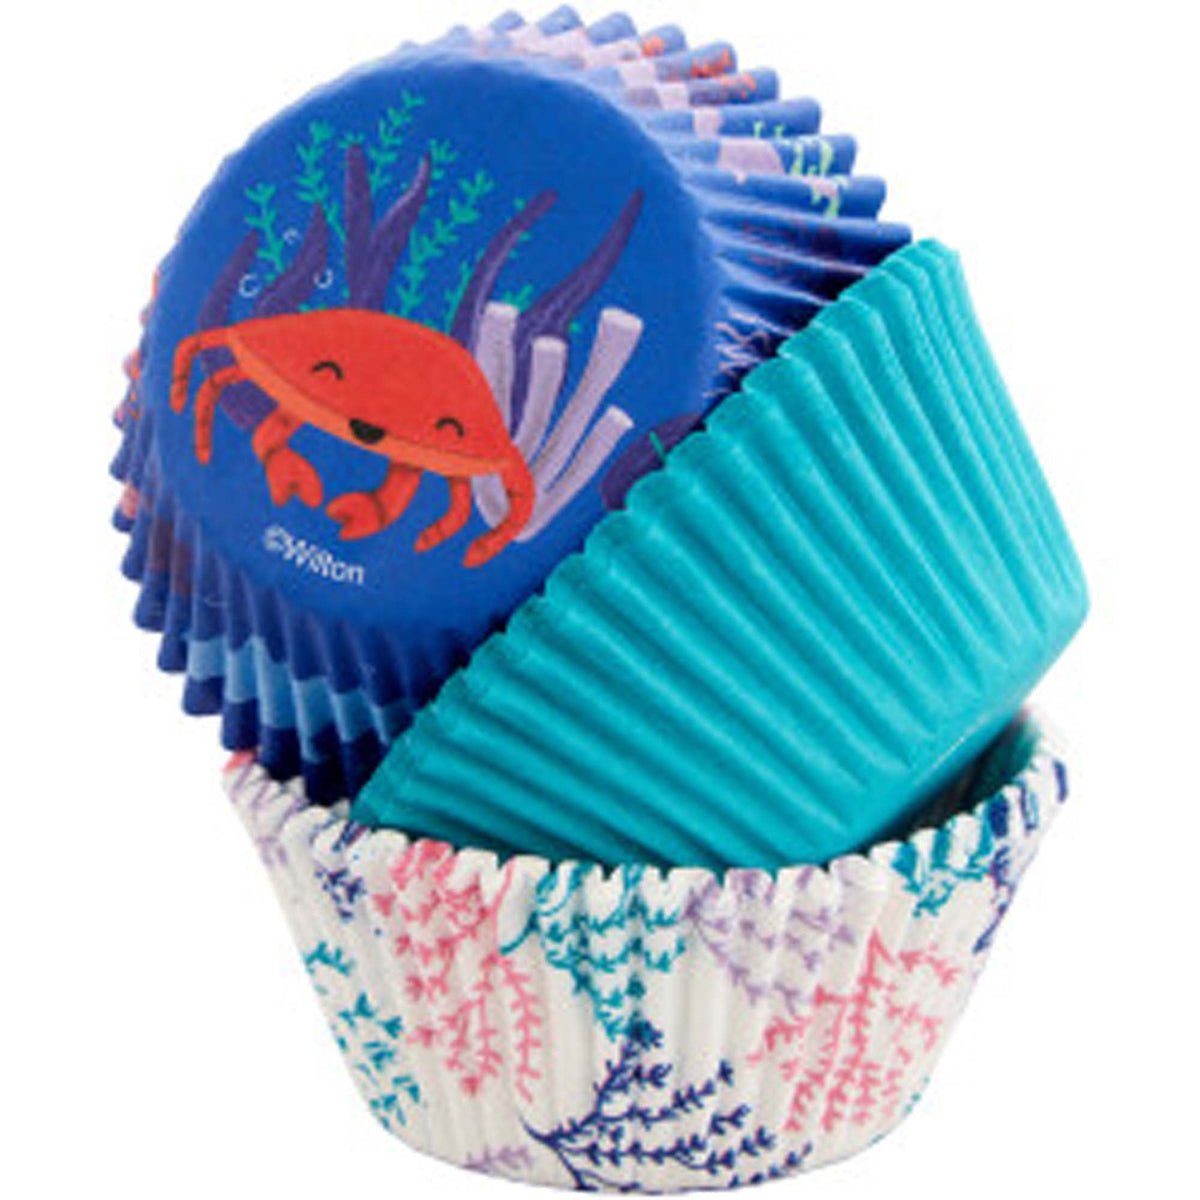 WILTON INDUSTRIES Cake Supplies Sea Life Cupcake Cups, 75 Count